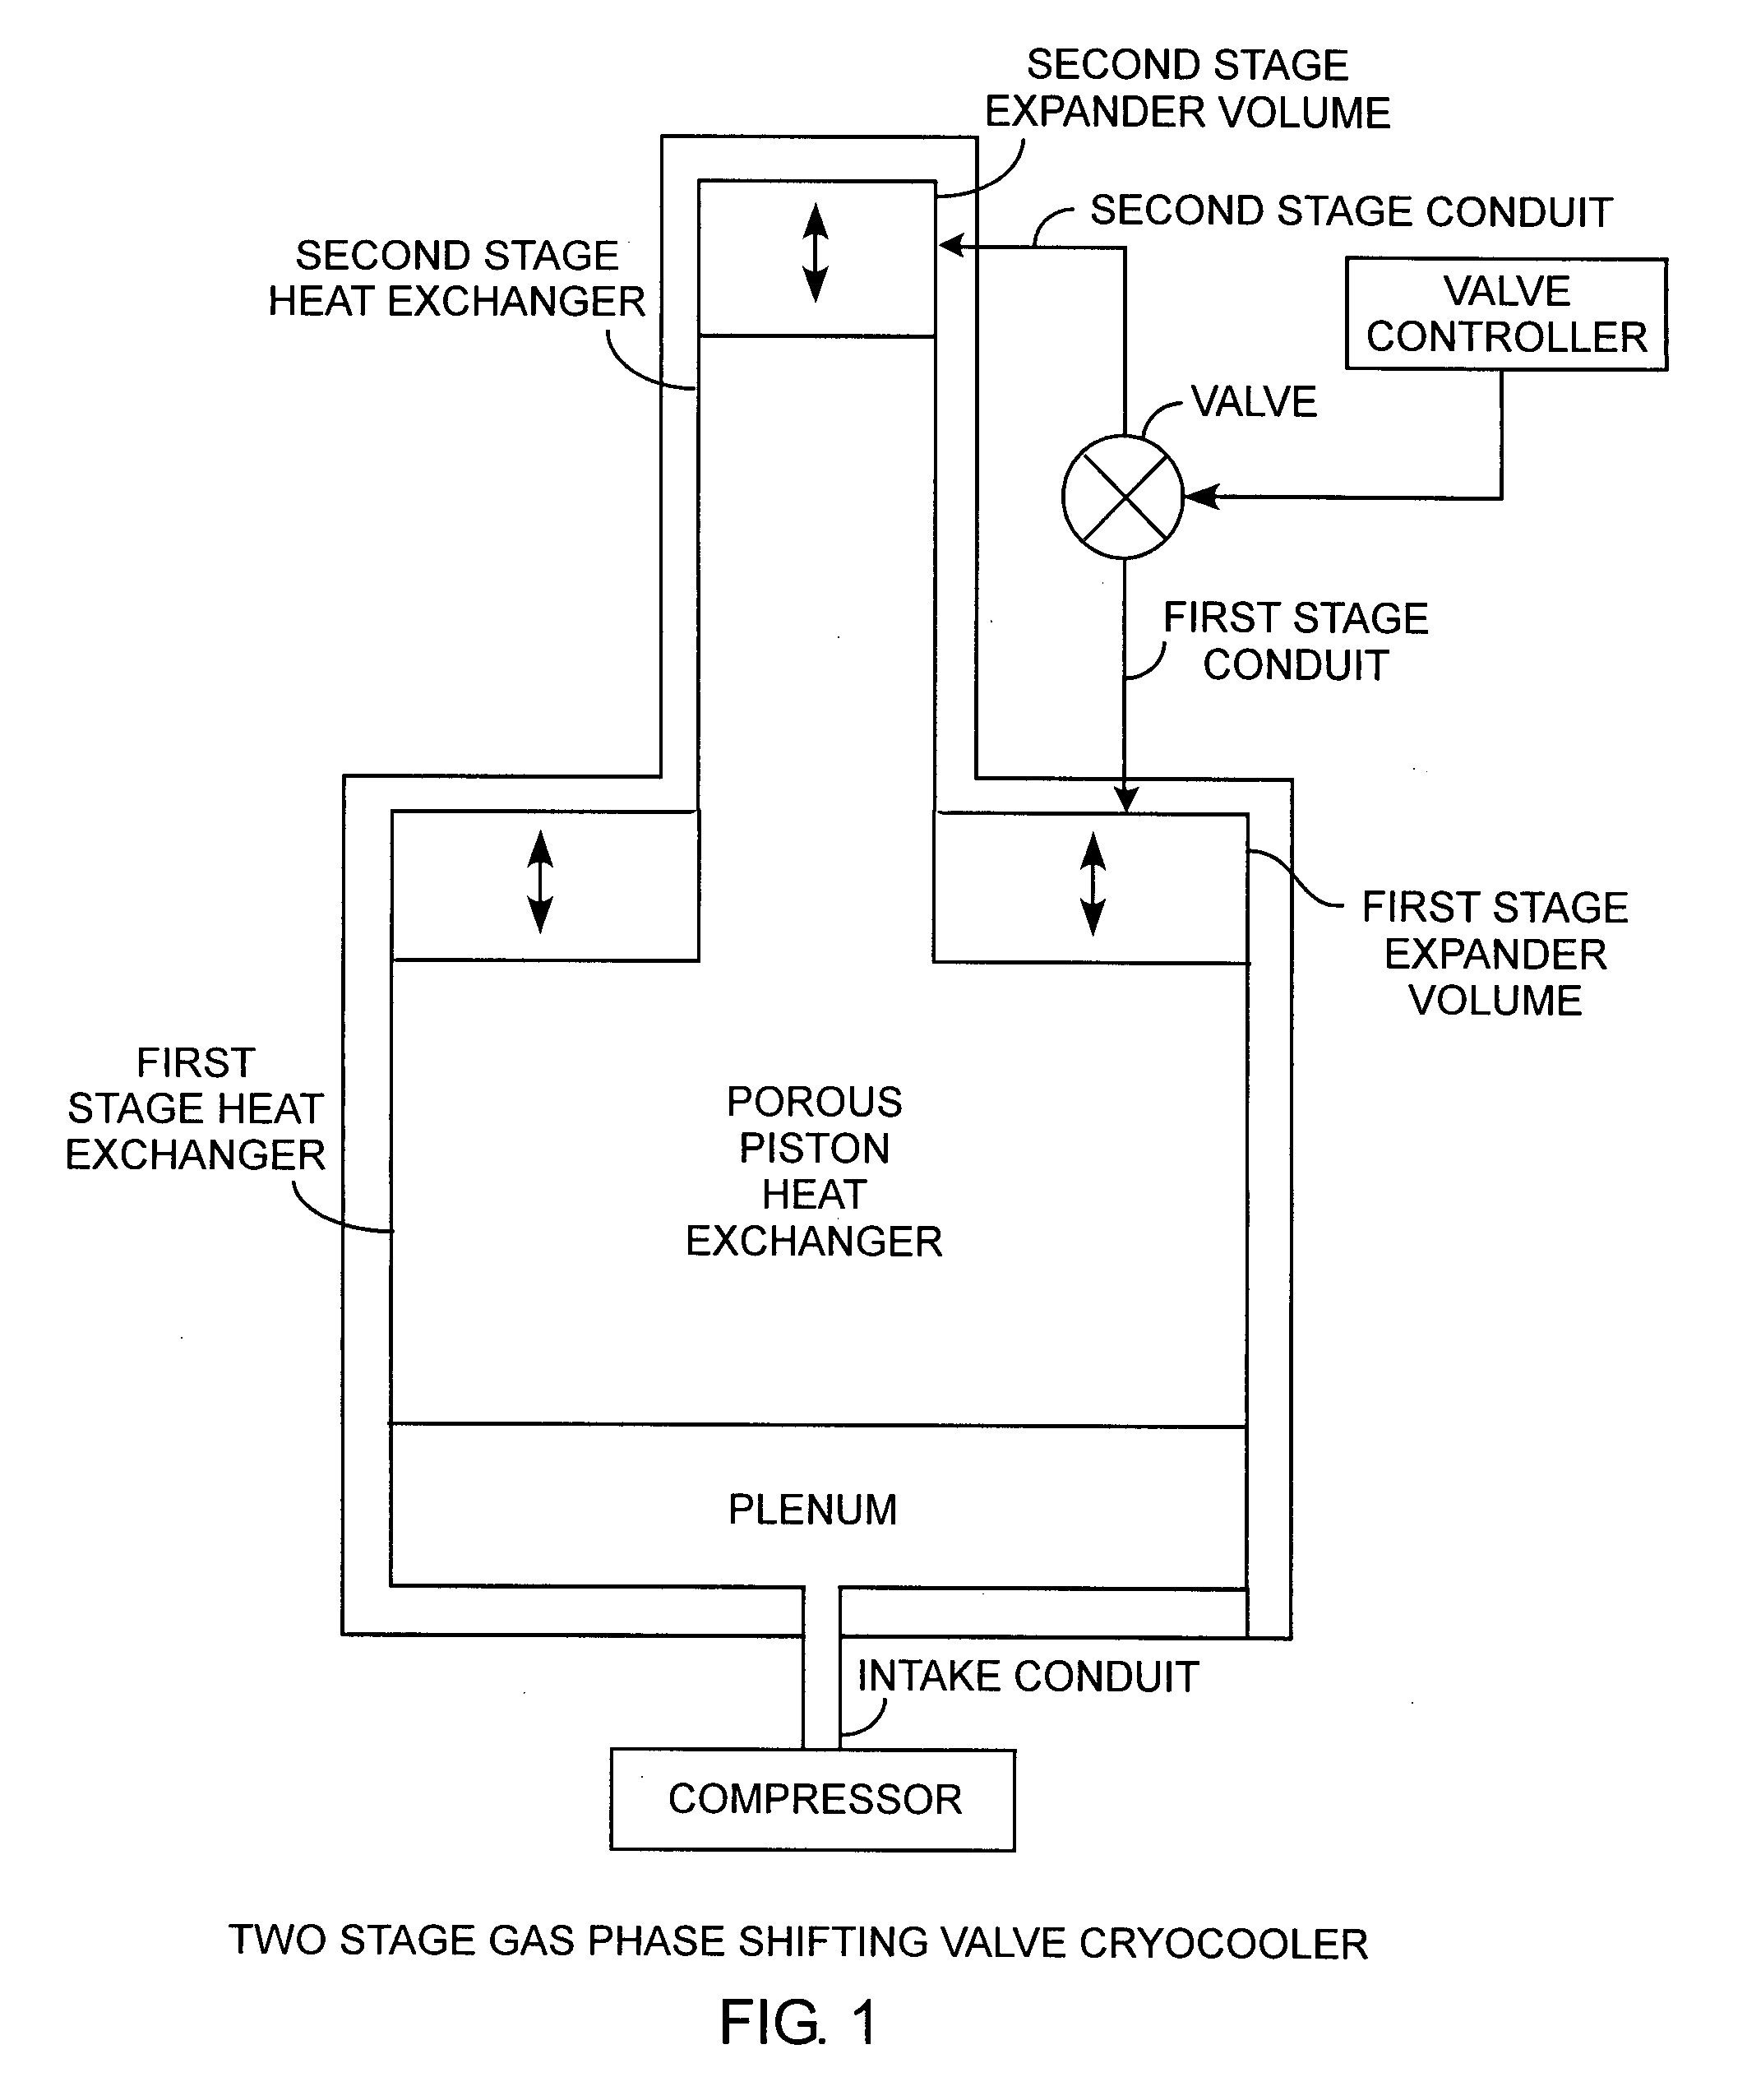 Controlled and variable gas phase shifting cryocooler